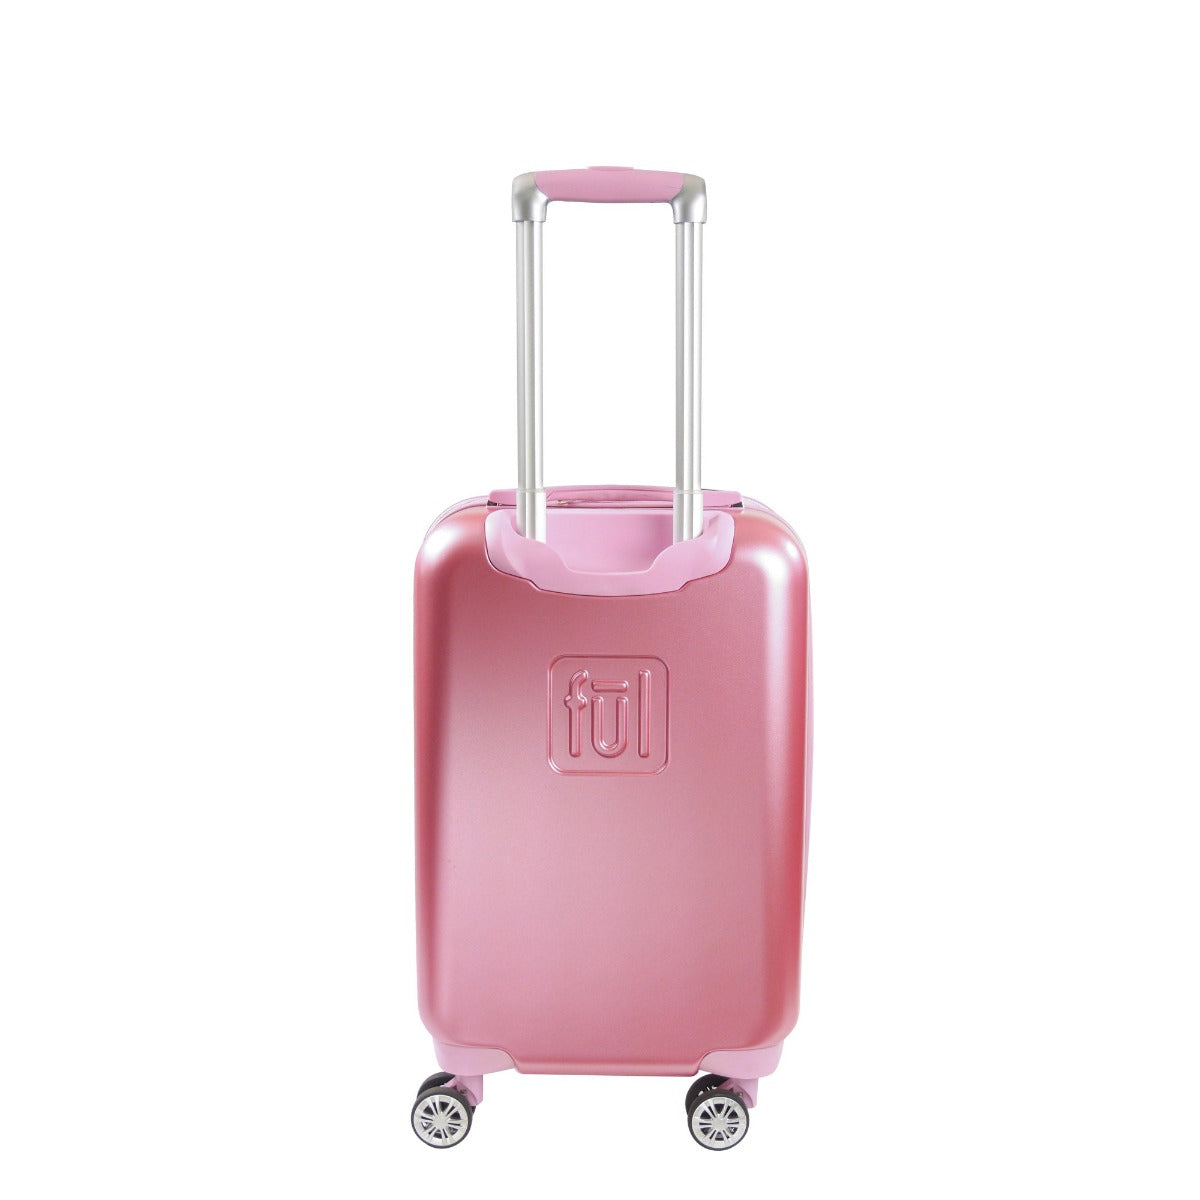 Hello Kitty x Ful 21" hard-sided spinner rolling carry-on luggage suitcase metallic pink